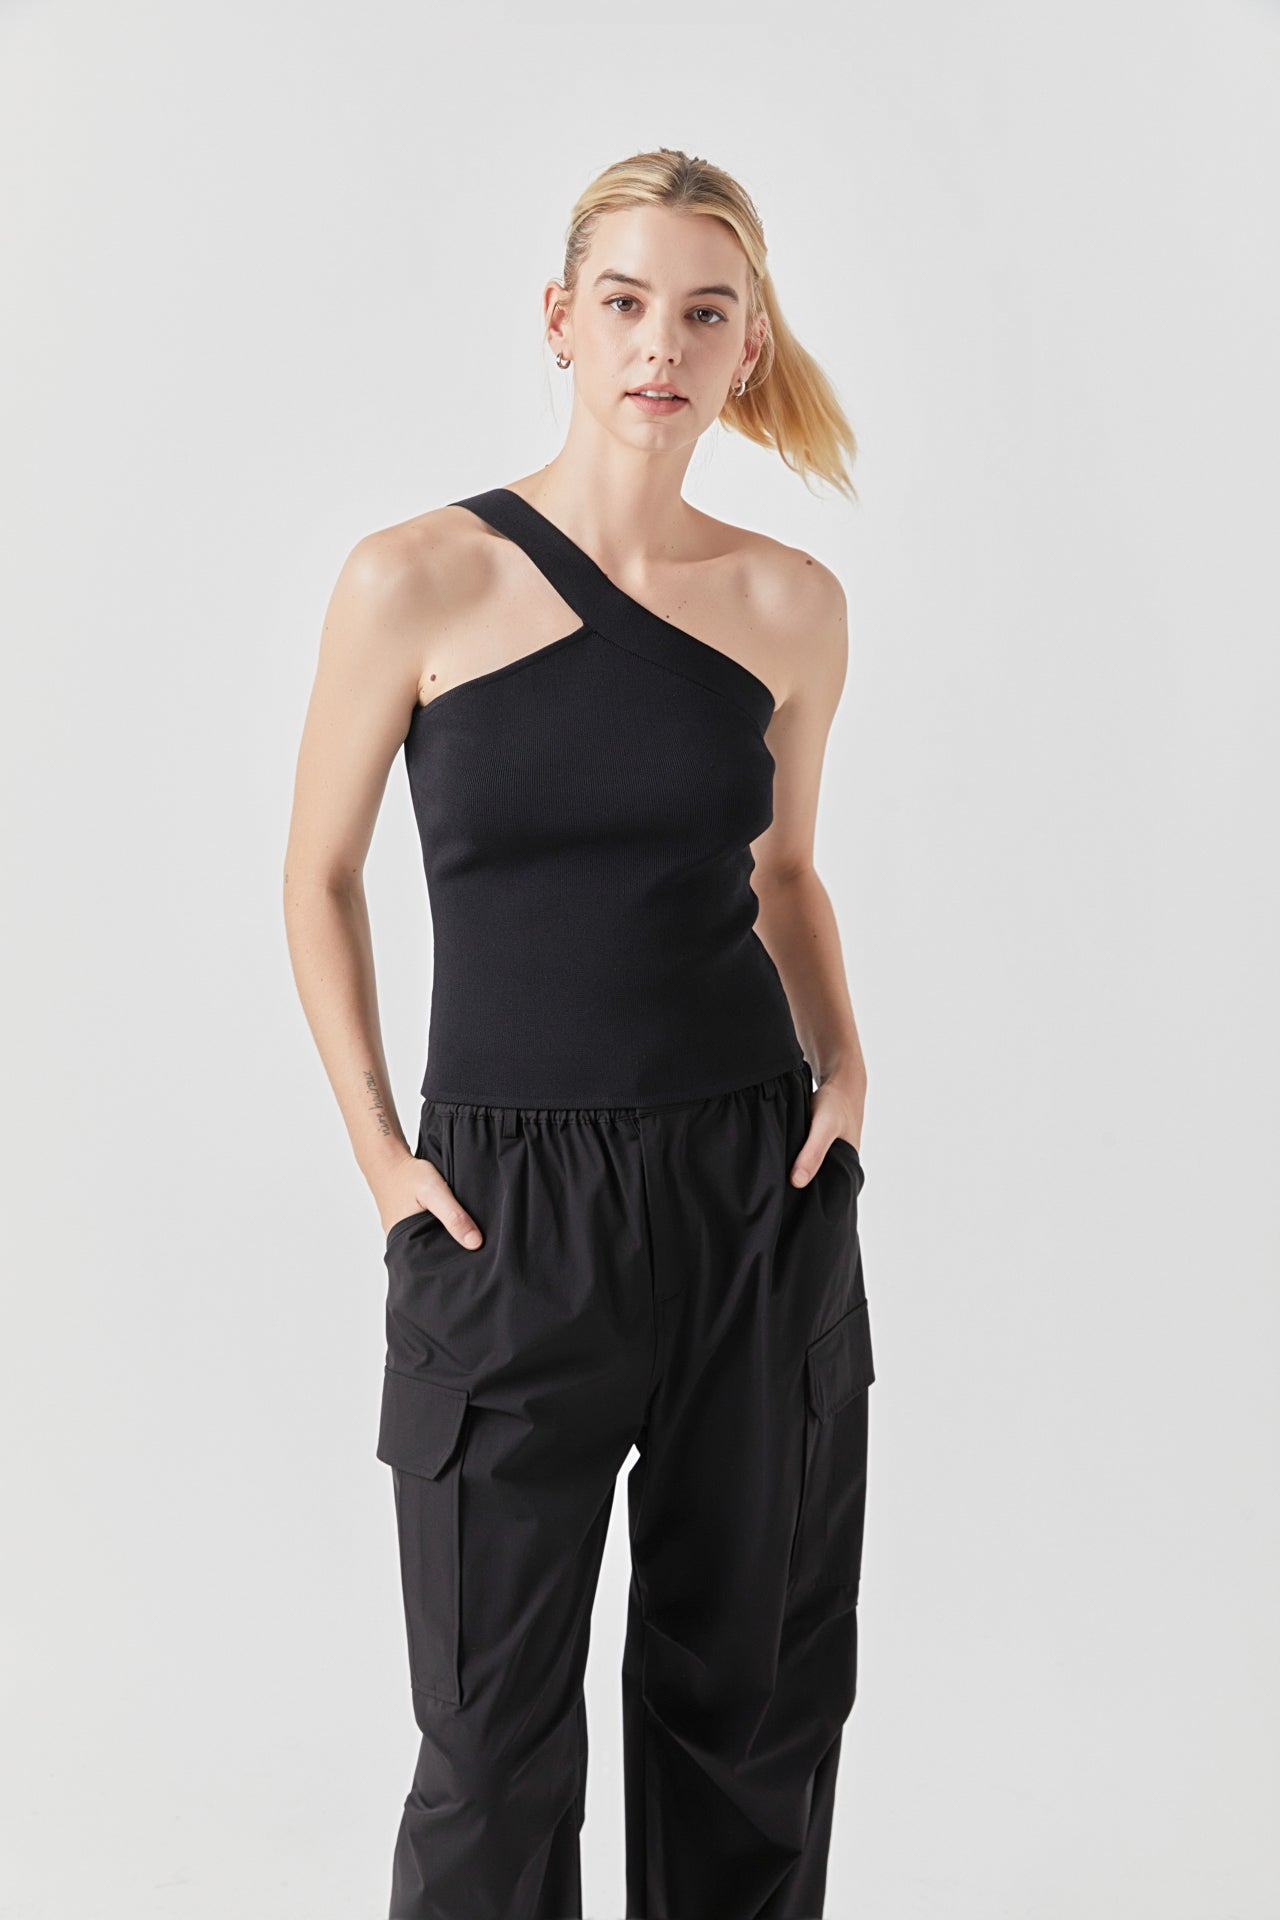 GREY LAB - Asymmetrical One-Shoulder Knit Tank Top - CAMI TOPS & TANK available at Objectrare